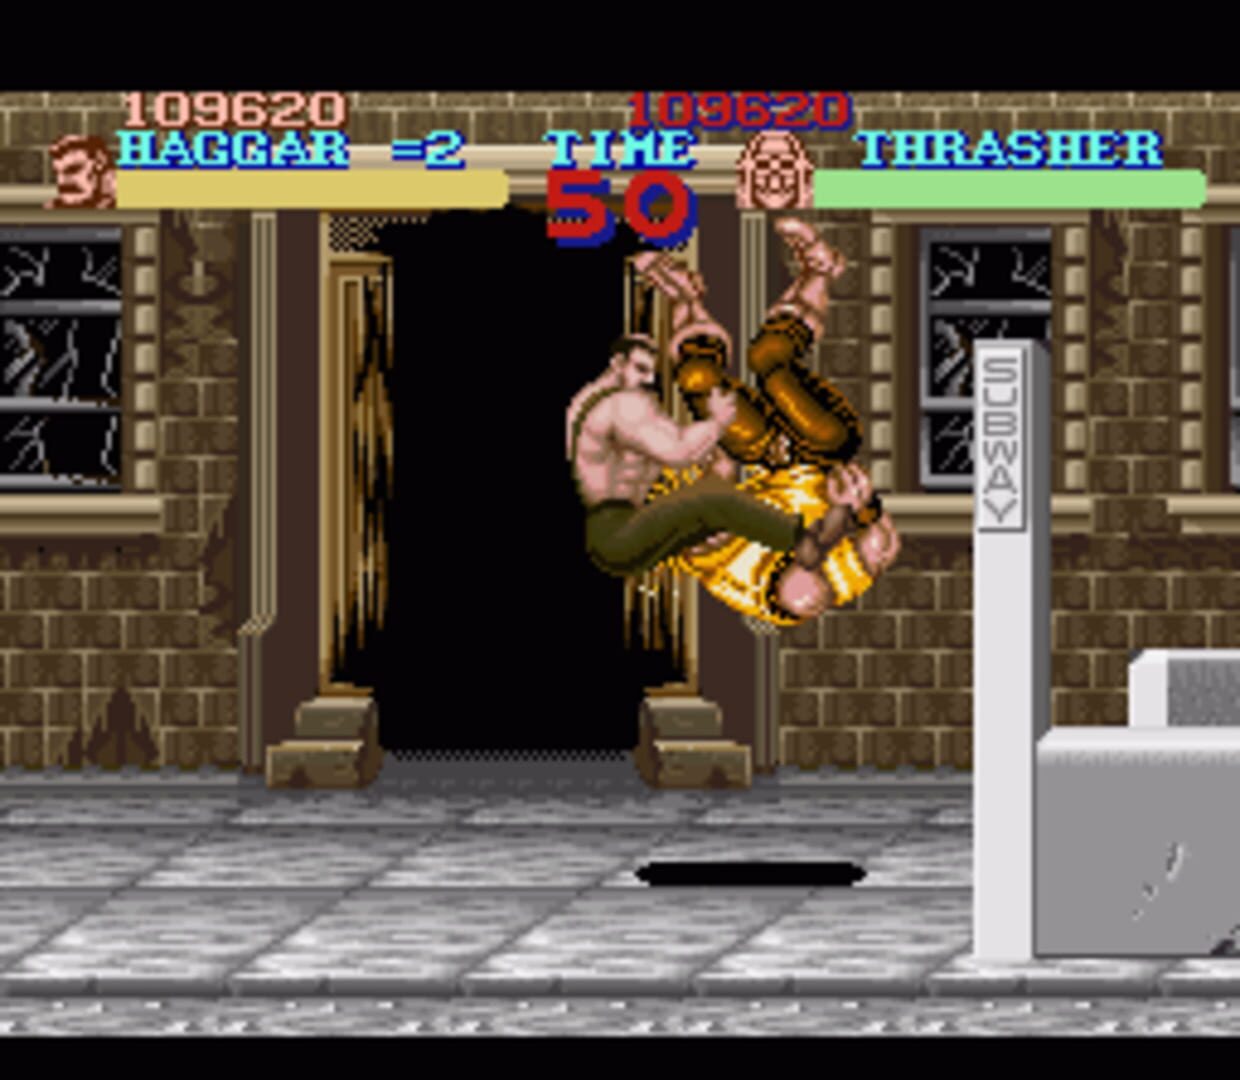 Final fight snes. Final Fight 1 Snes скрин. Ultimate tag игра. Final Fight Snes romhacking.